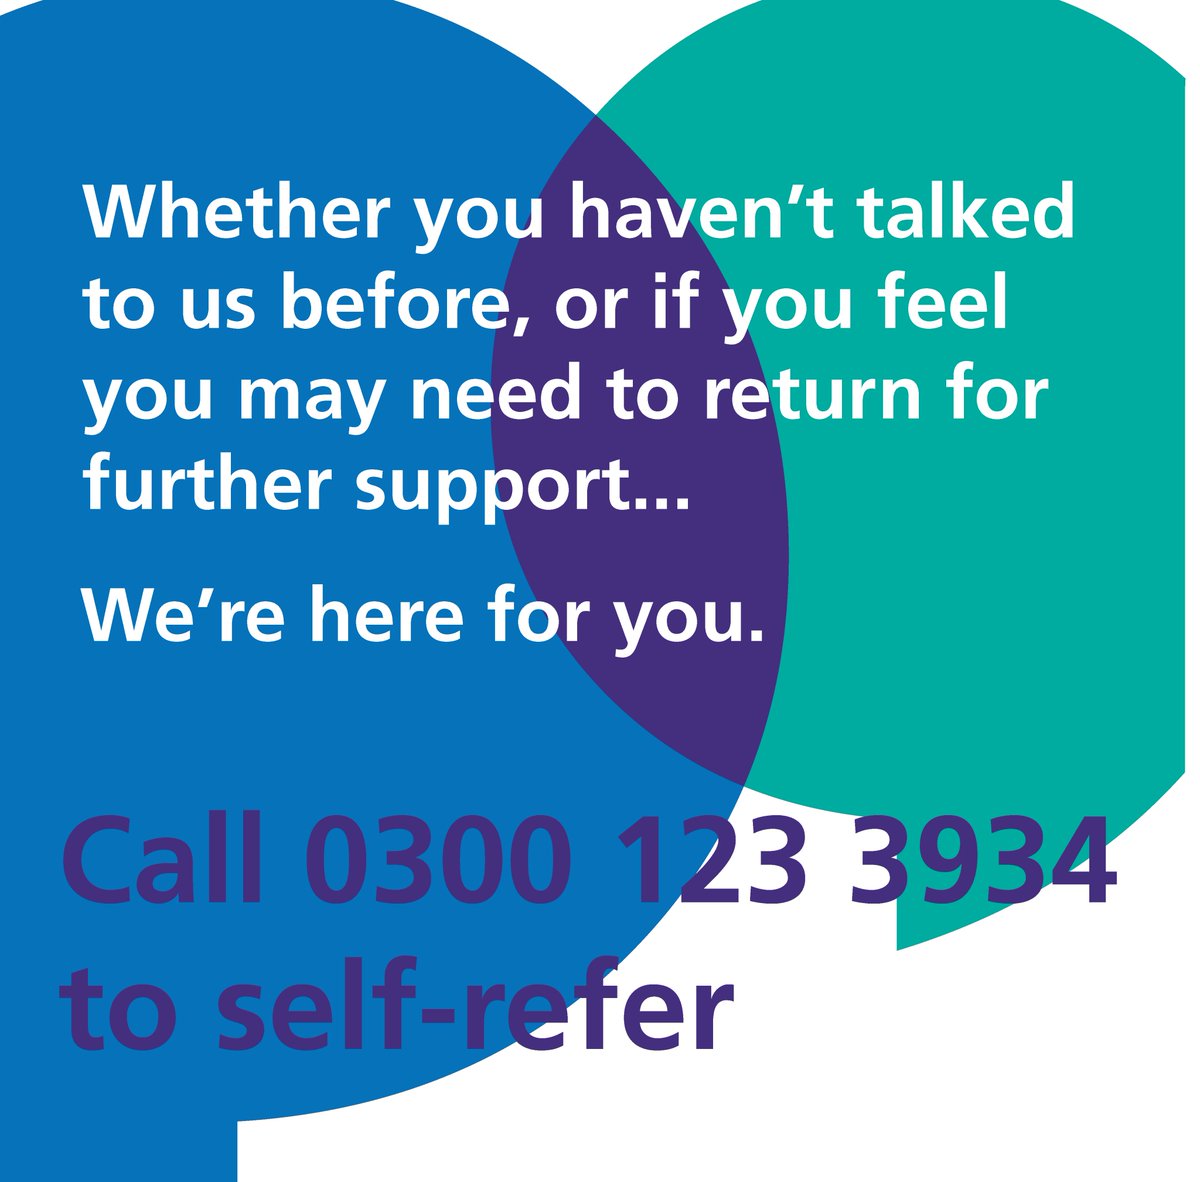 We accept self-referrals to our service whether you haven't reached out to us before, or if you have used Talking Change before and would like to speak to us again. Self-refer by calling 0300 123 3934 or by visiting our website talkingchange.nhs.uk